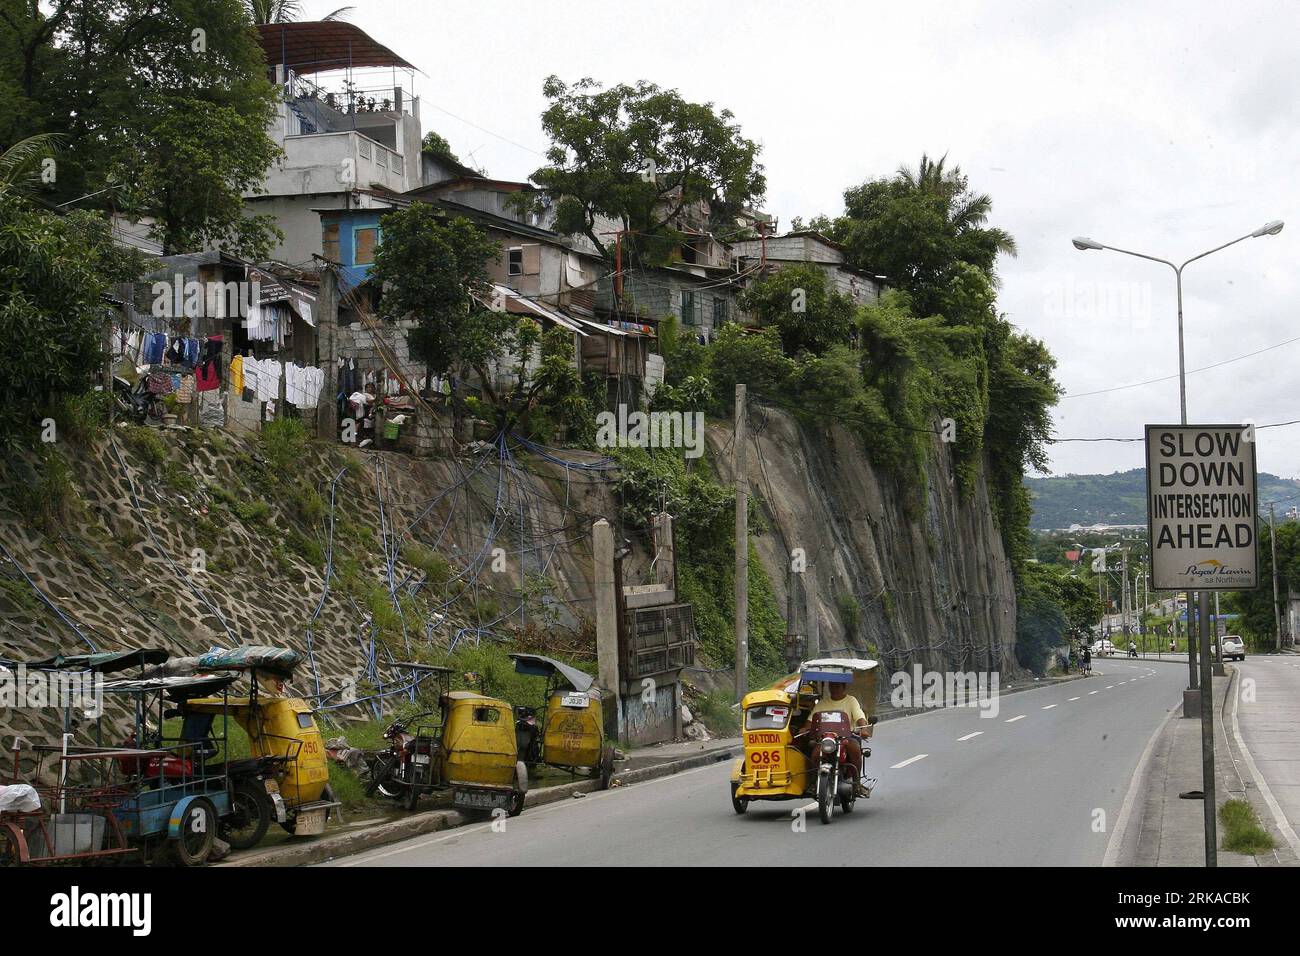 Bildnummer: 54311525  Datum: 18.08.2010  Copyright: imago/Xinhua (100818) -- MANILA, Aug. 18, 2010 (Xinhua) -- Houses are seen on the top of a hill in San Mateo, Rizal, Philippines, Aug. 18, 2010. The Philippine Atmospheric, Geophysic and Astronomical Services Administration warned the public about possible landslides due to a shallow low pressure area 60 kilometers northwest of Catarman, northern Samar. Some areas in the country that are prone to floods and landslides are inhabited by residents, according to the National Geohazard Mapping and Assessment Program done by the Mines and Geoscienc Stock Photo